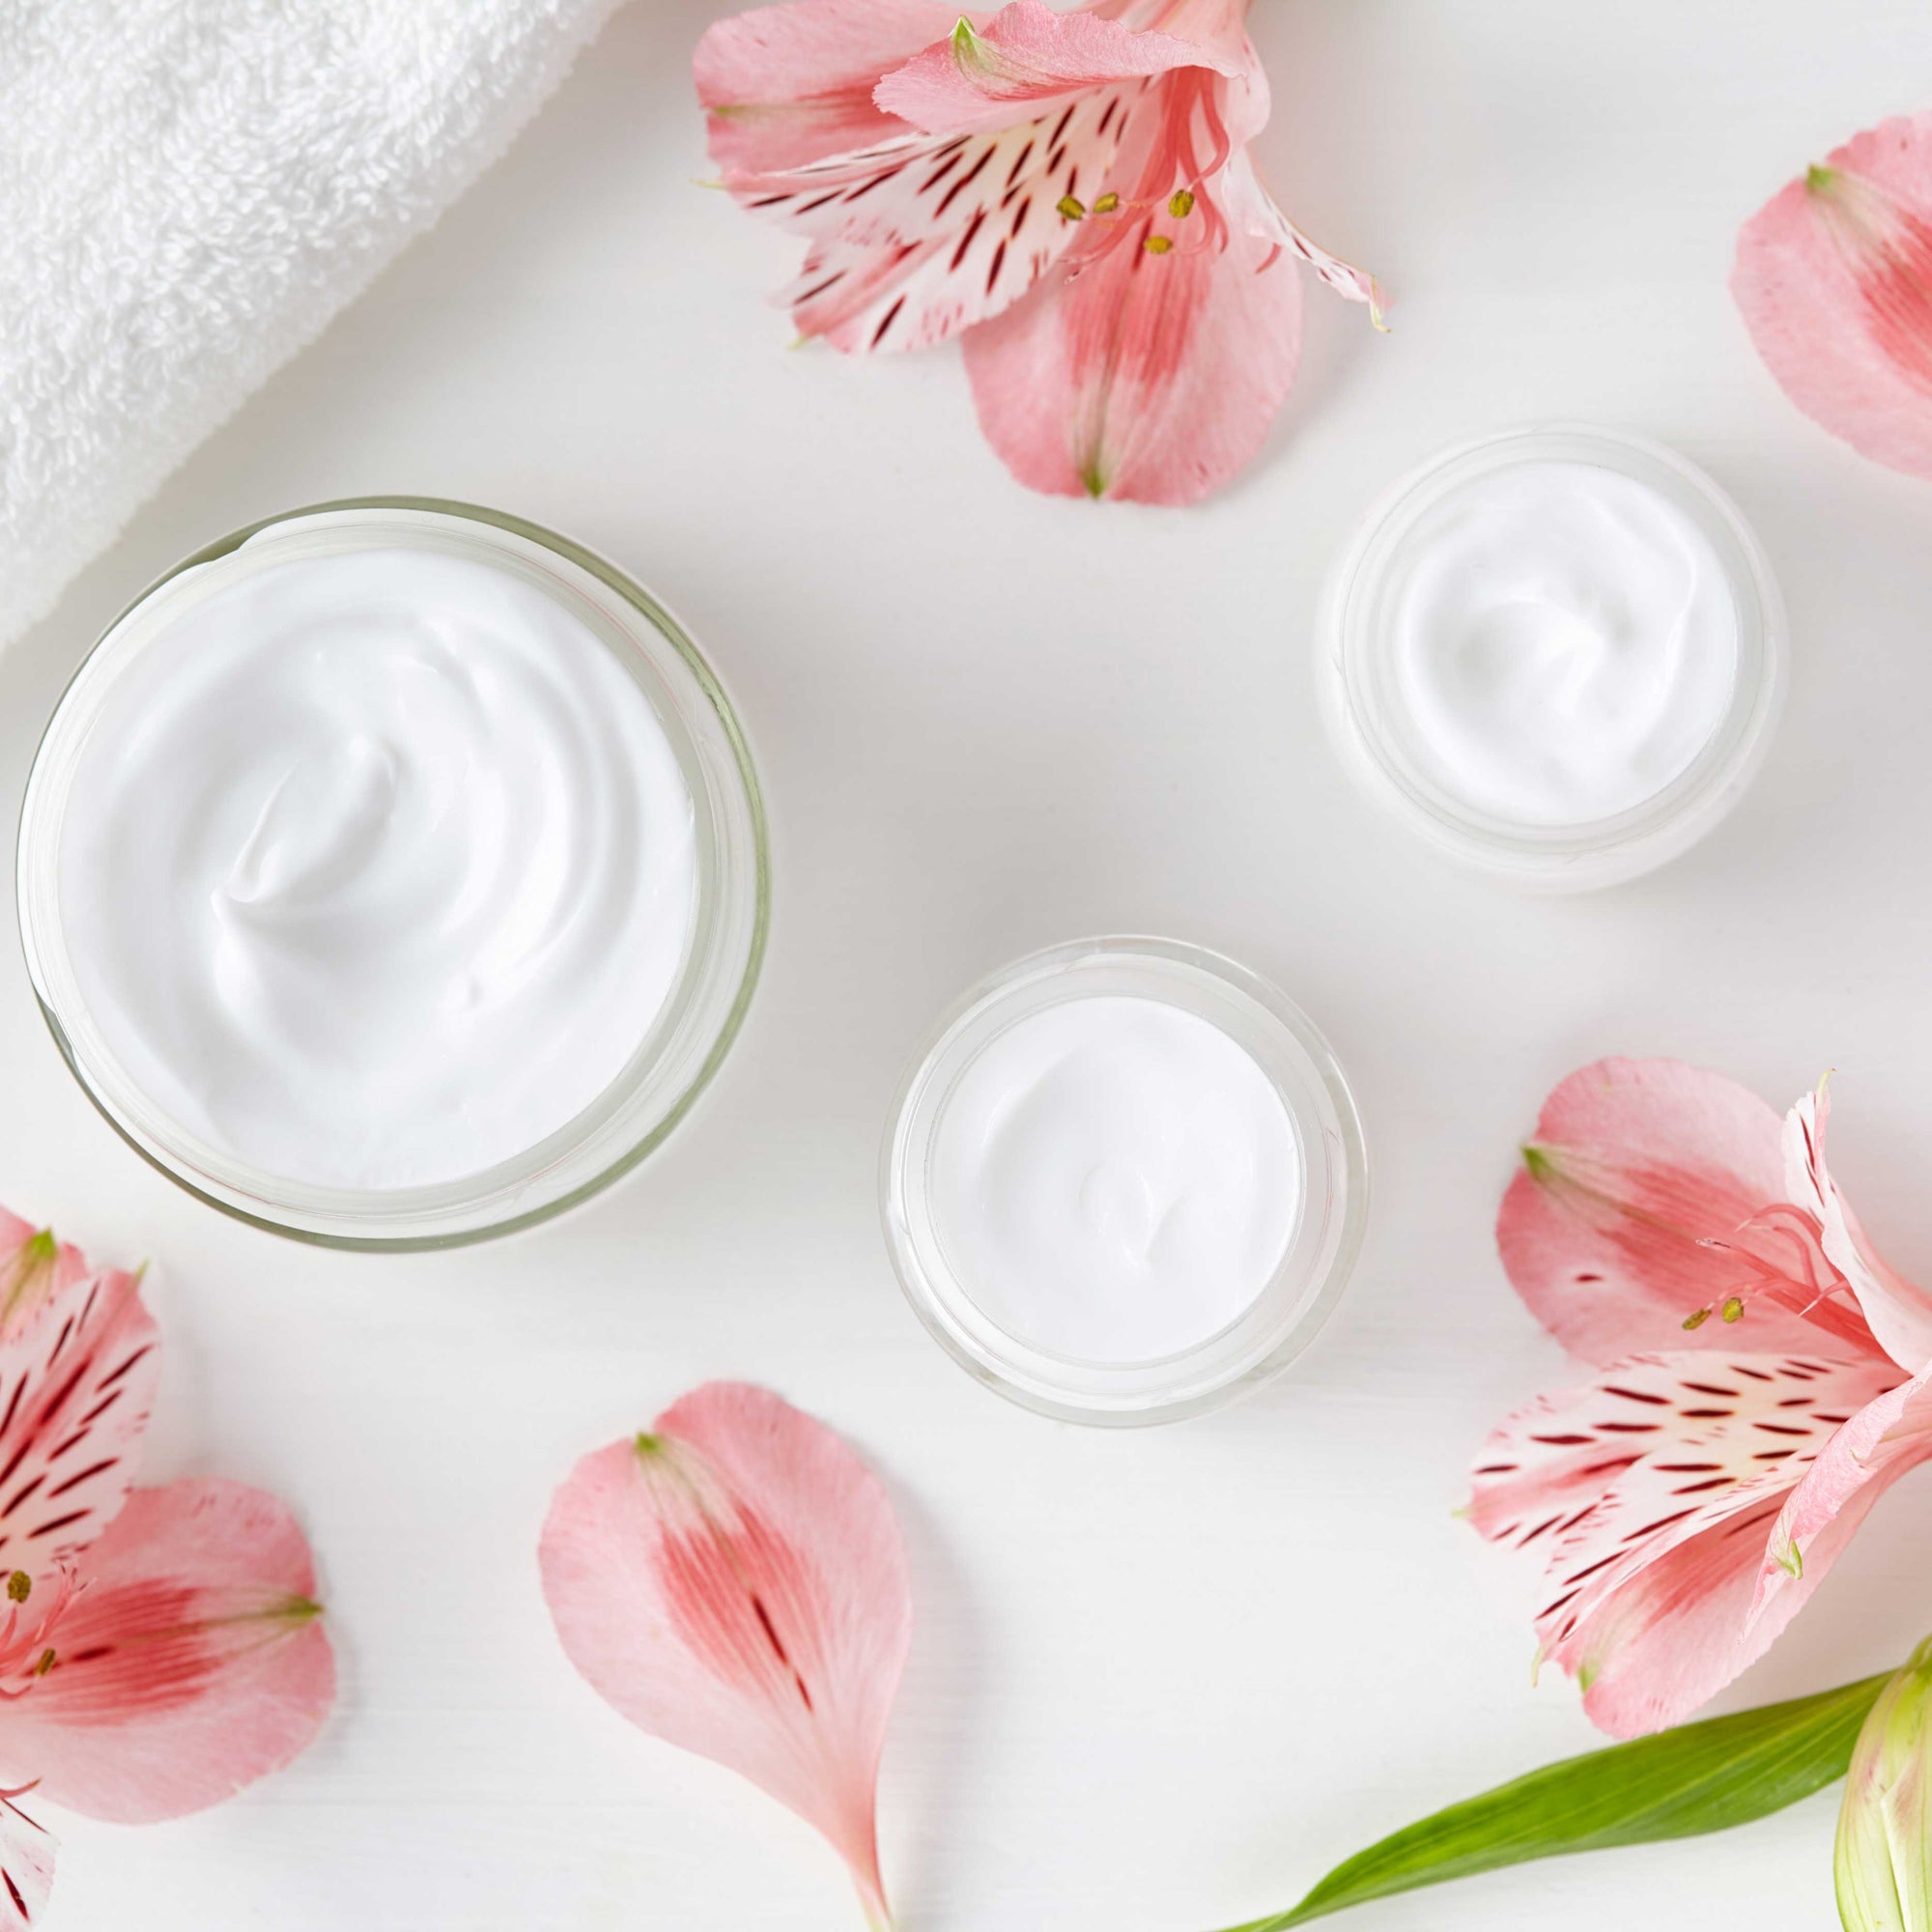 white cream and beauty products in round glass containers with pink flowers